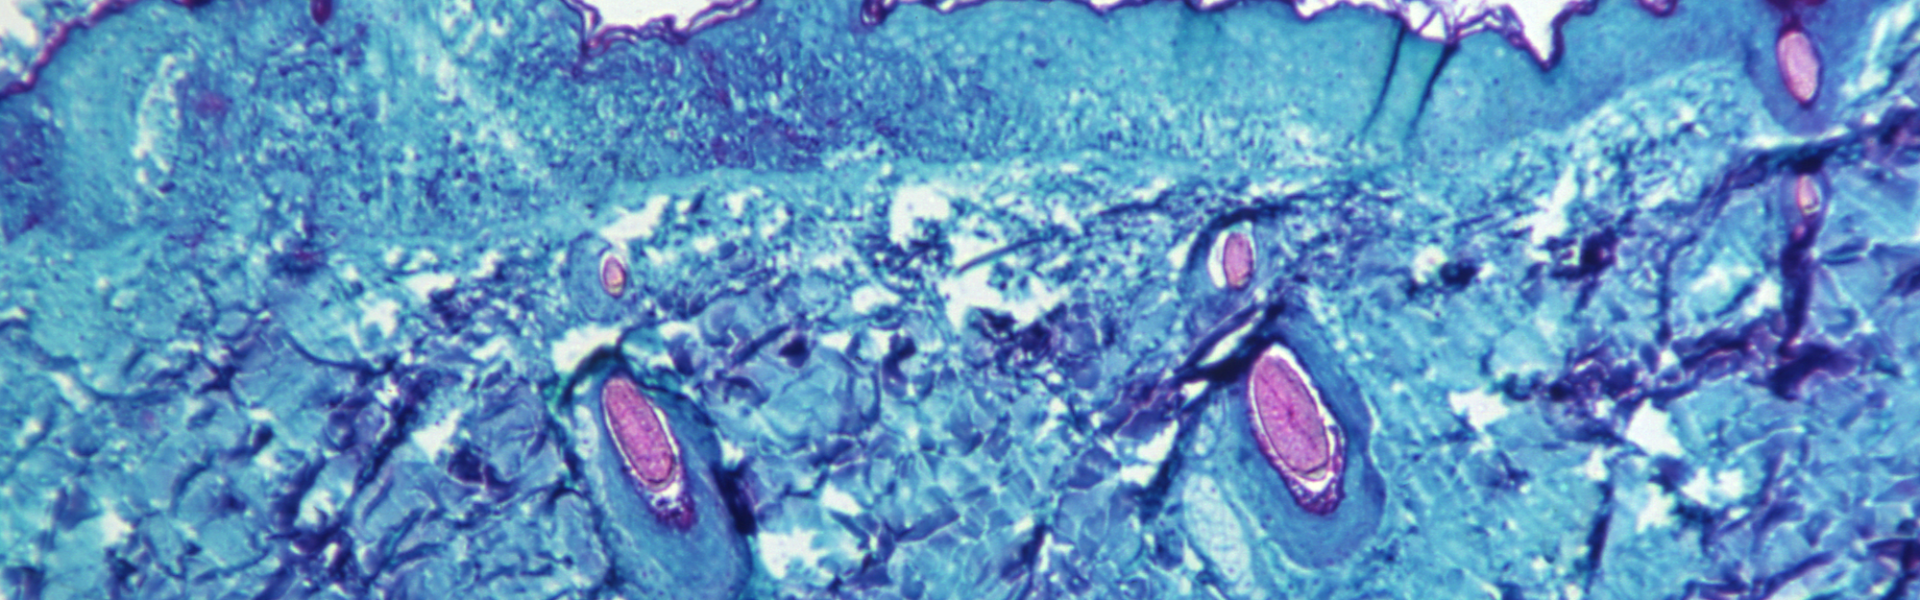 A microscopic image of skin tissue from a monkey infected with monkeypox virus